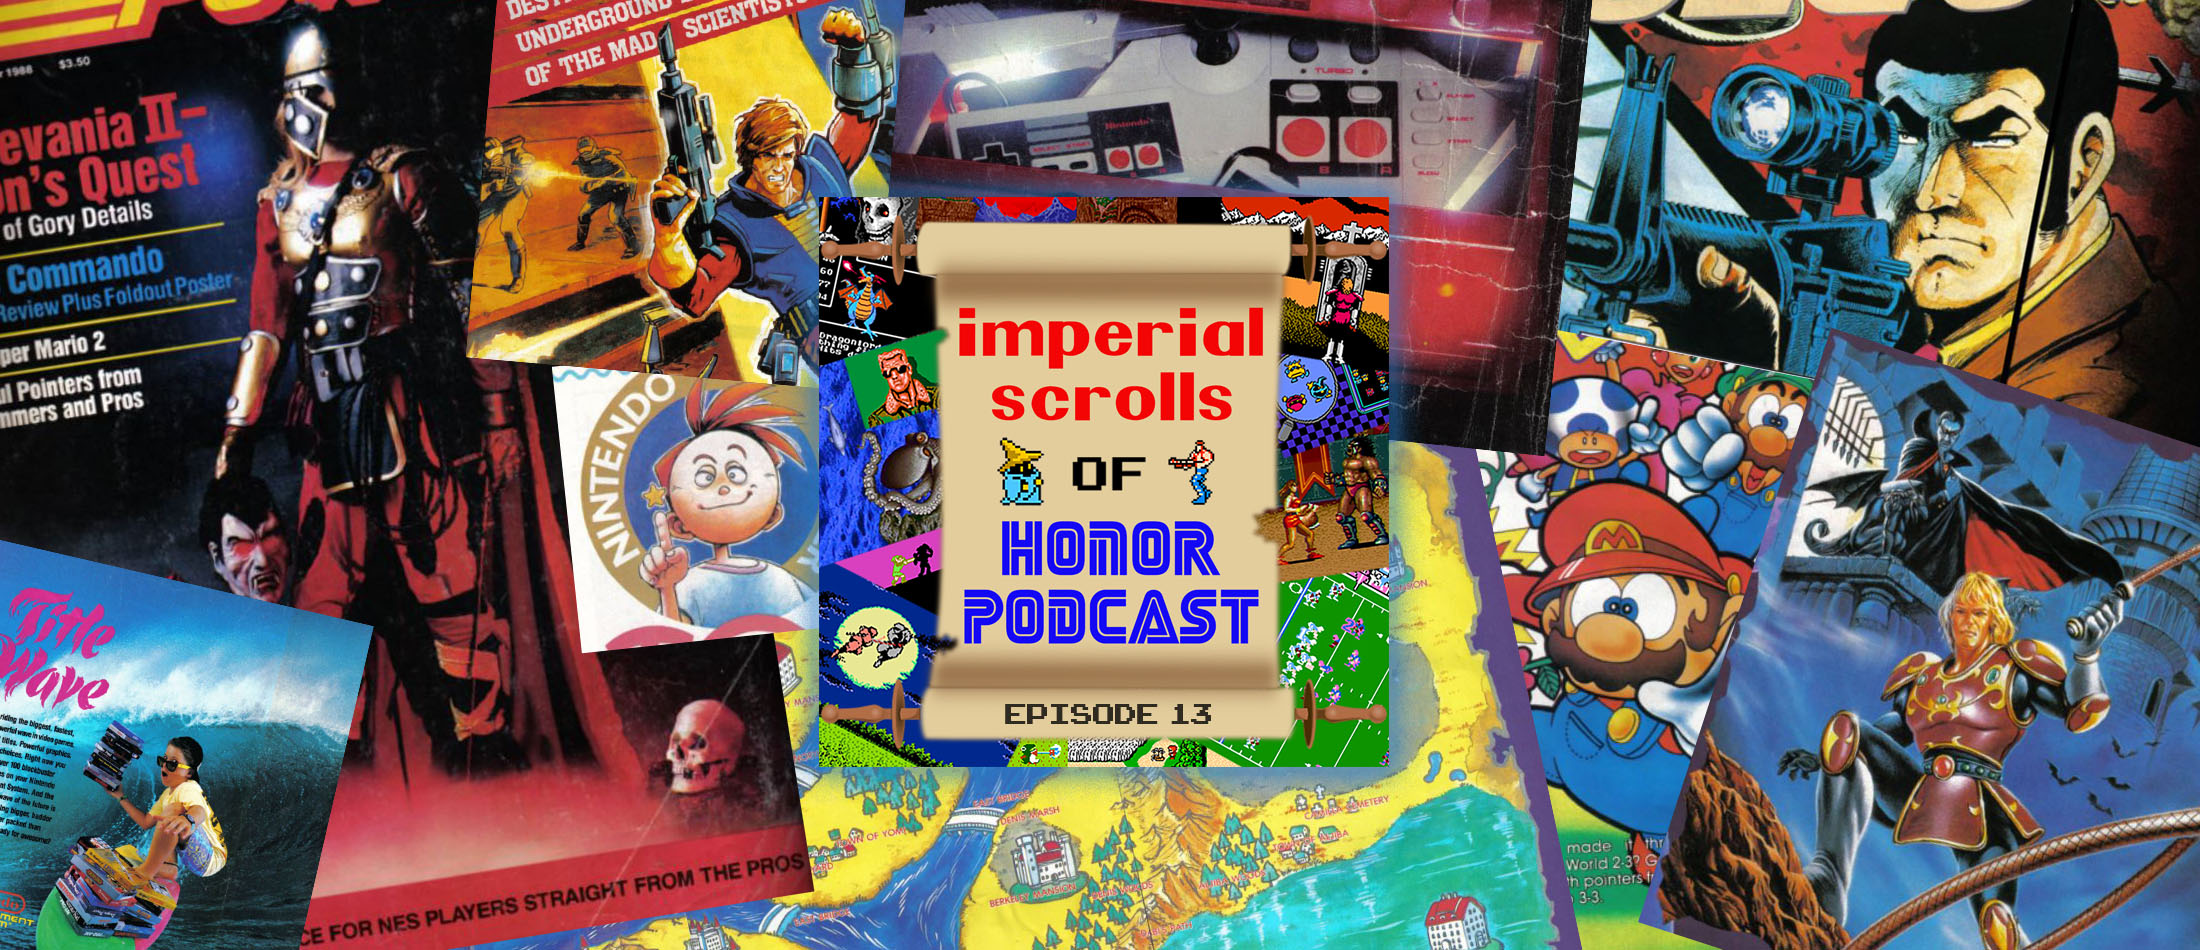 Imperial Scrolls of Honor Podcast - Episode 13 - Nintendo Power #2